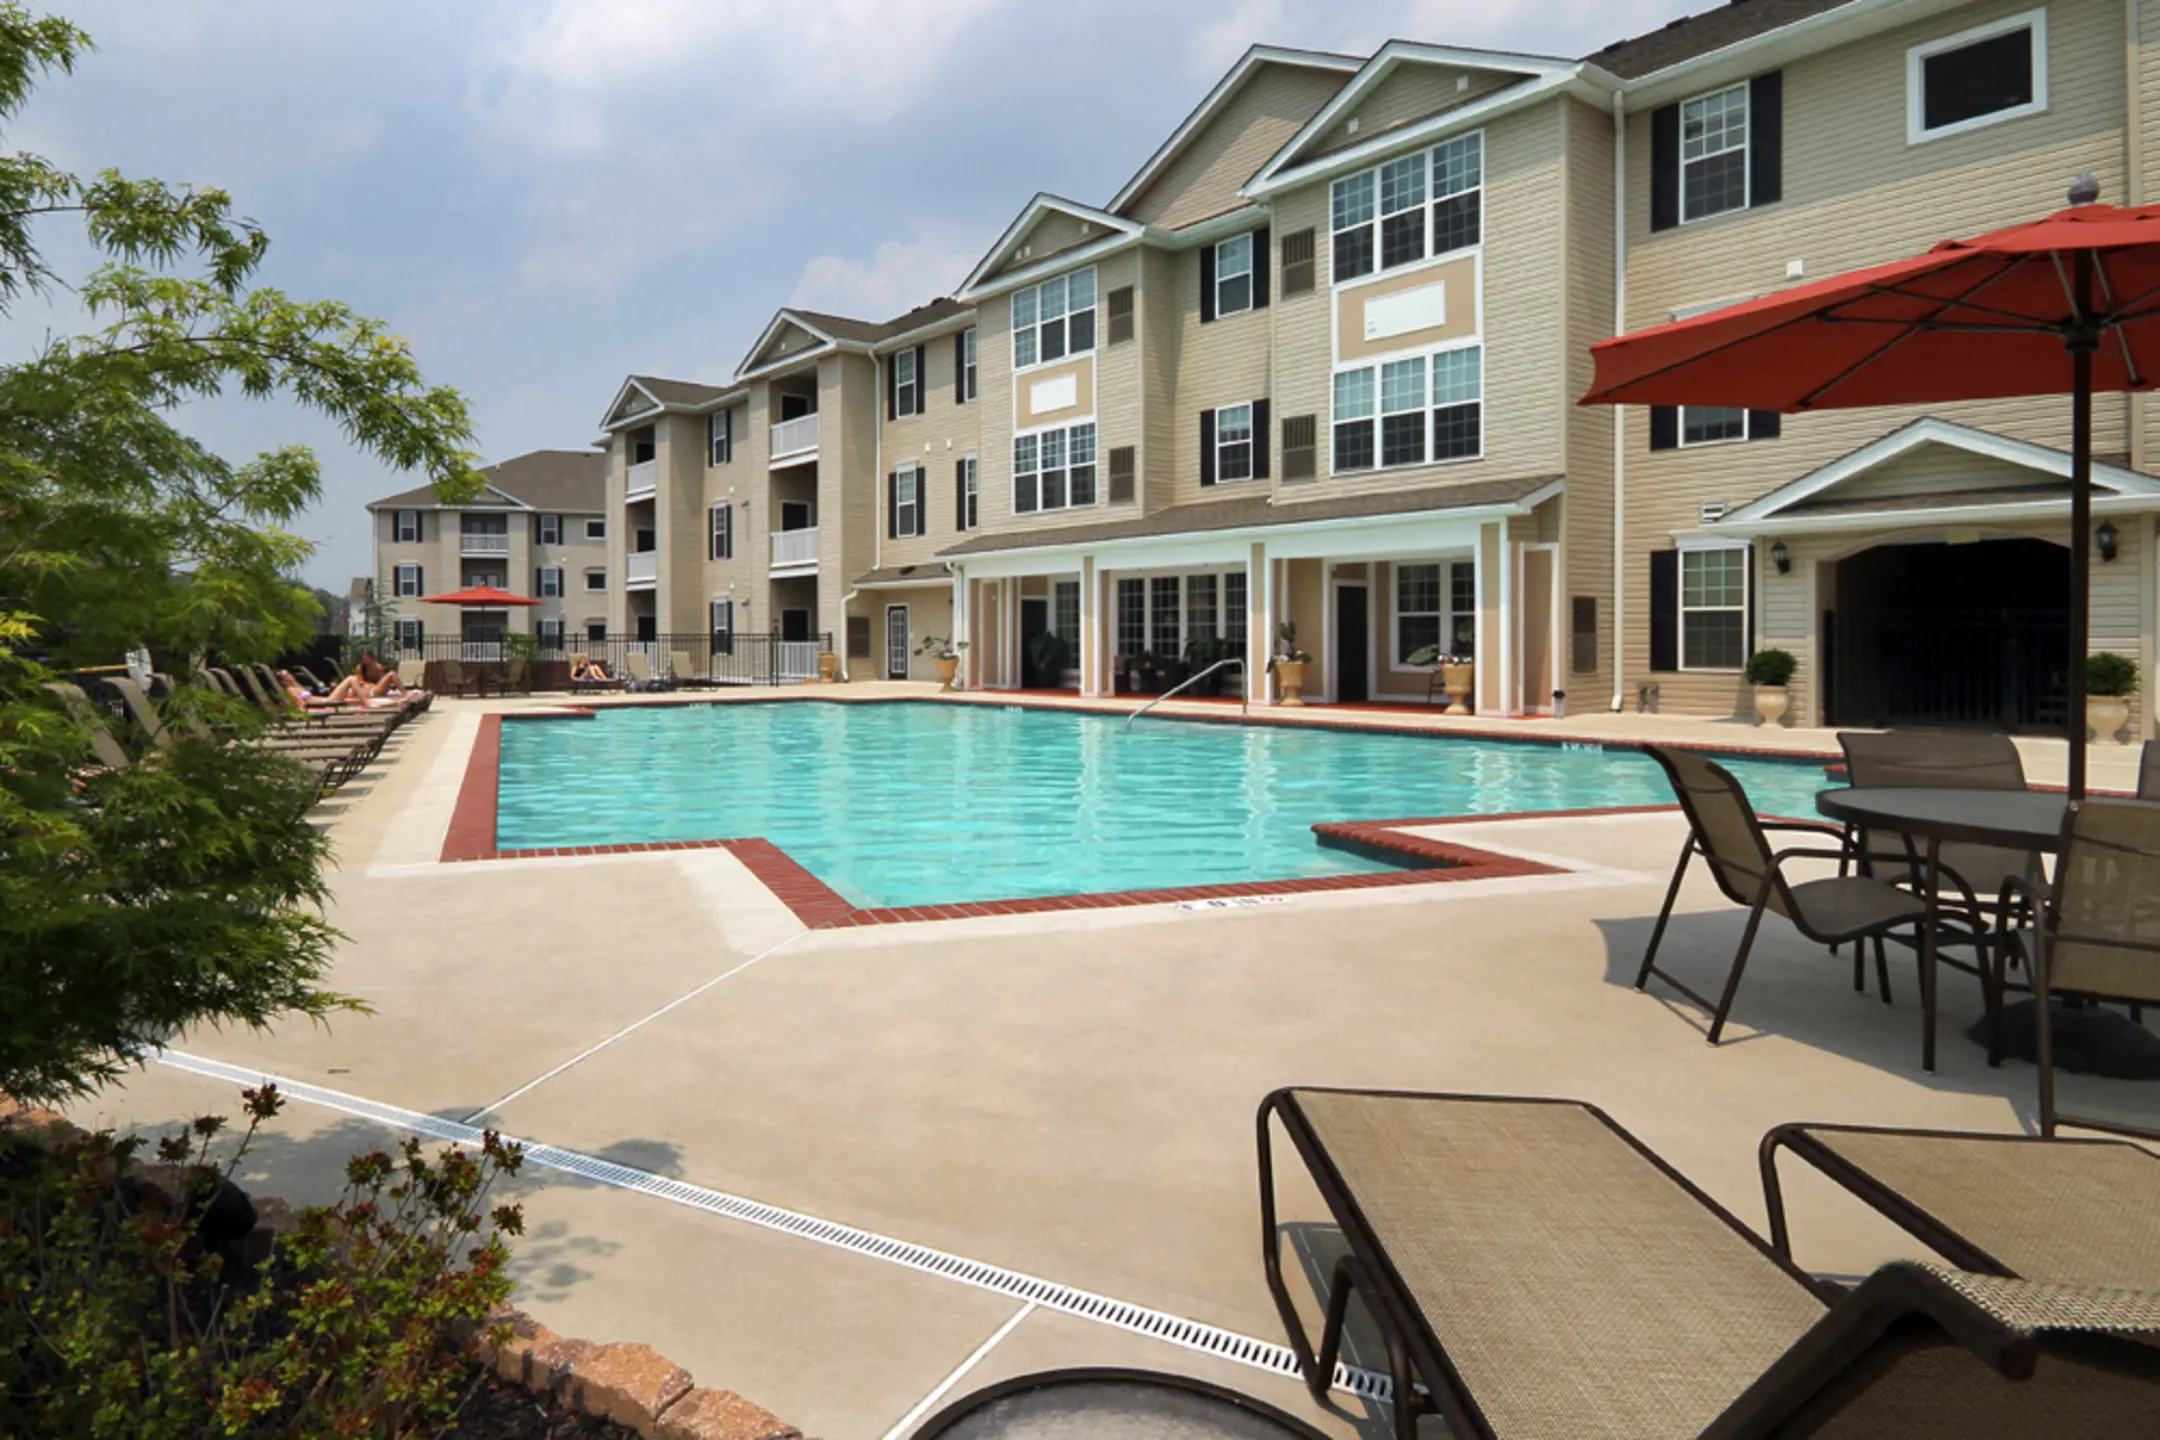 Pool - The Pointe At River Glen - Royersford, PA